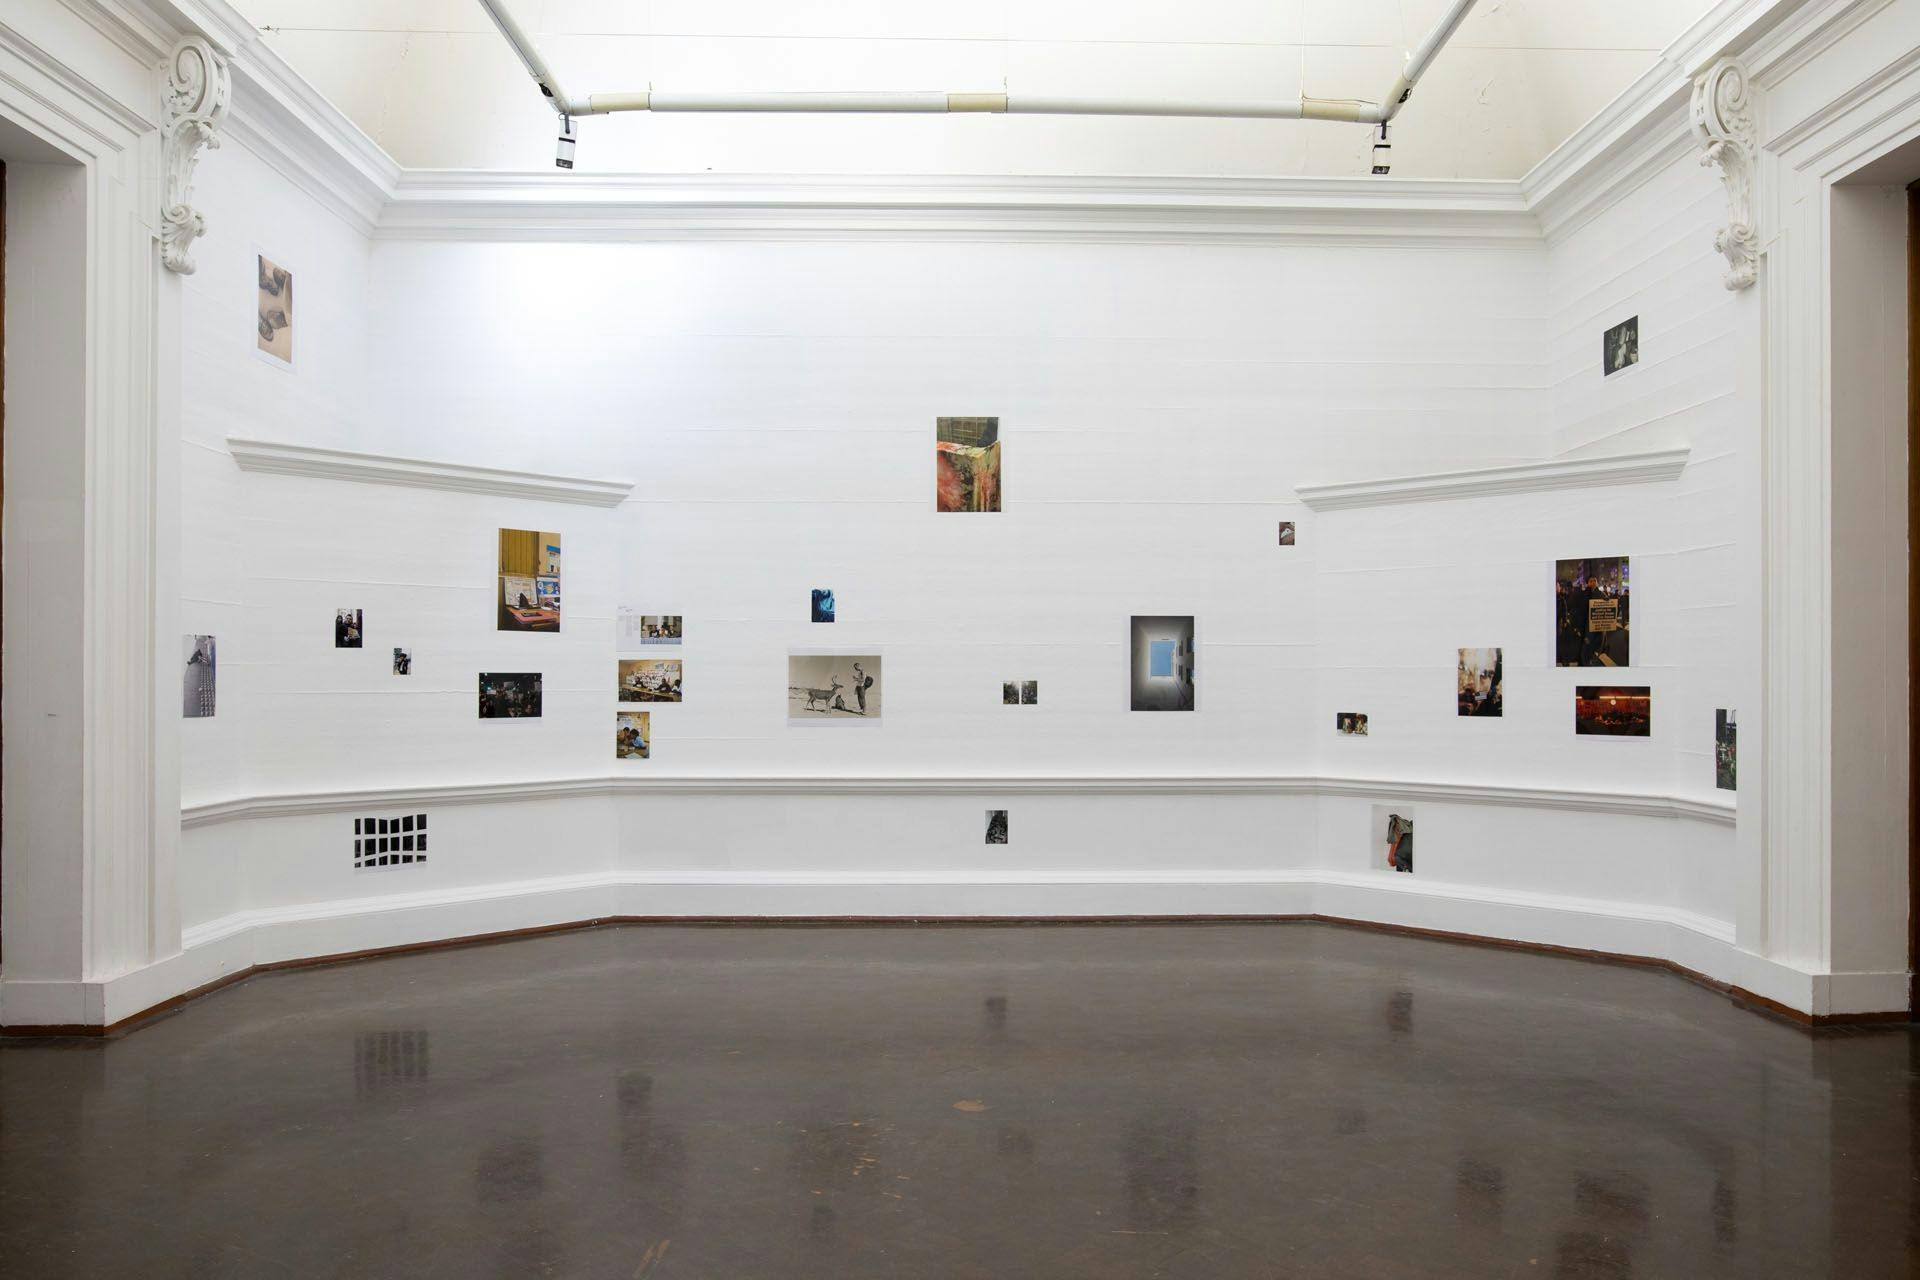 Installation view of the exhibition Wolfgang Tillmans: Fragile at Johannesburg Art Gallery, dated 2018.